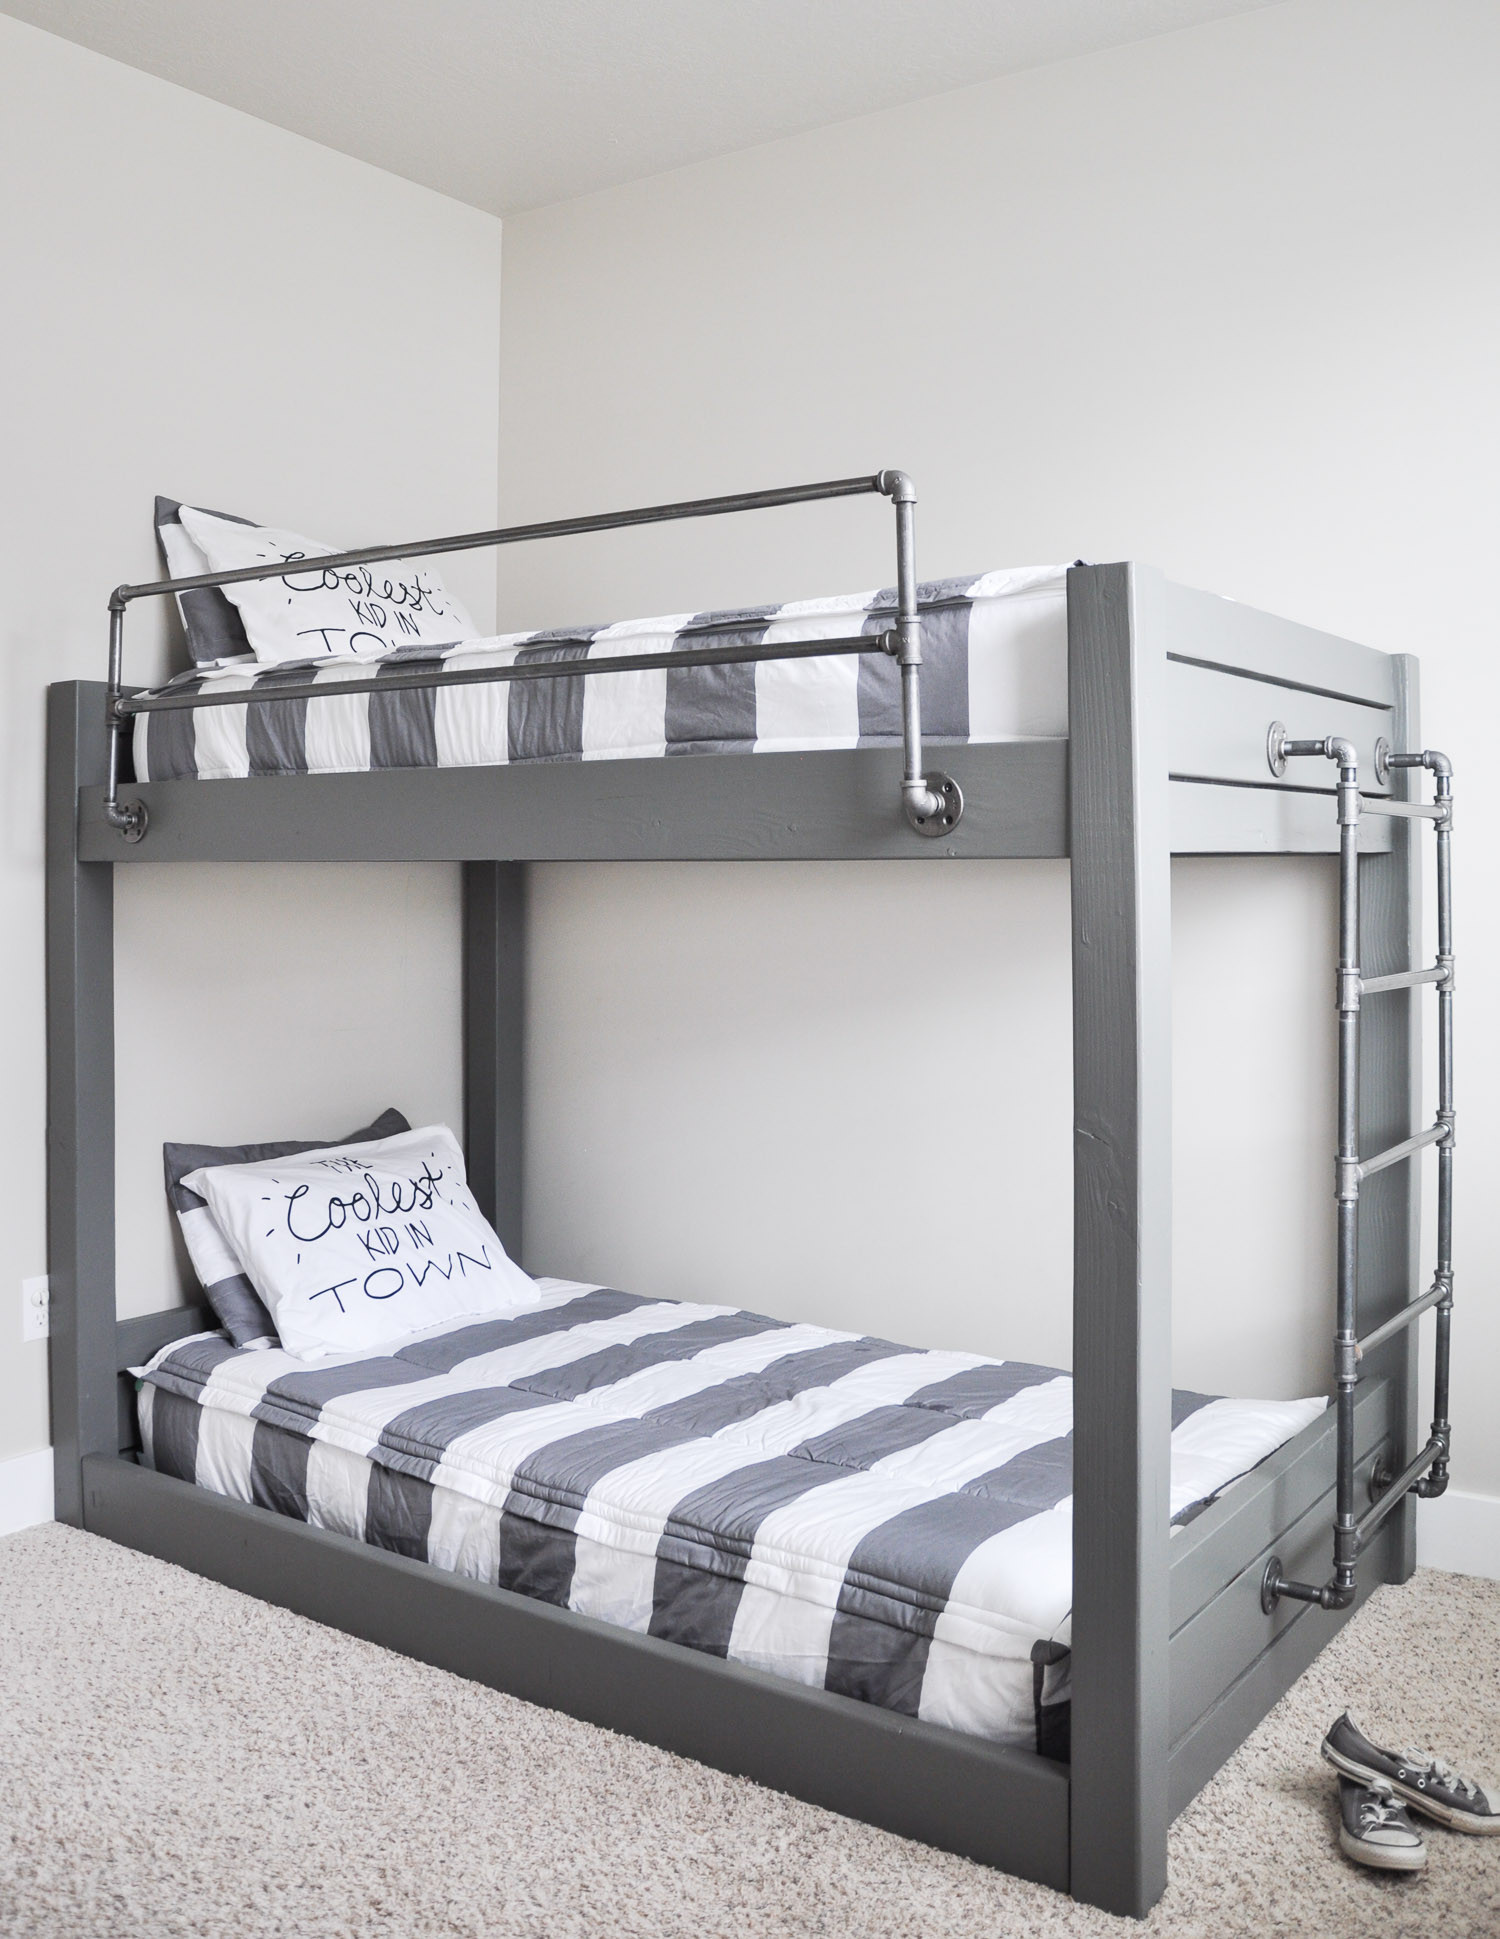 DIY Kids Bed Plans
 35 Free DIY Bunk Bed Plans to Save Your Bedroom Space